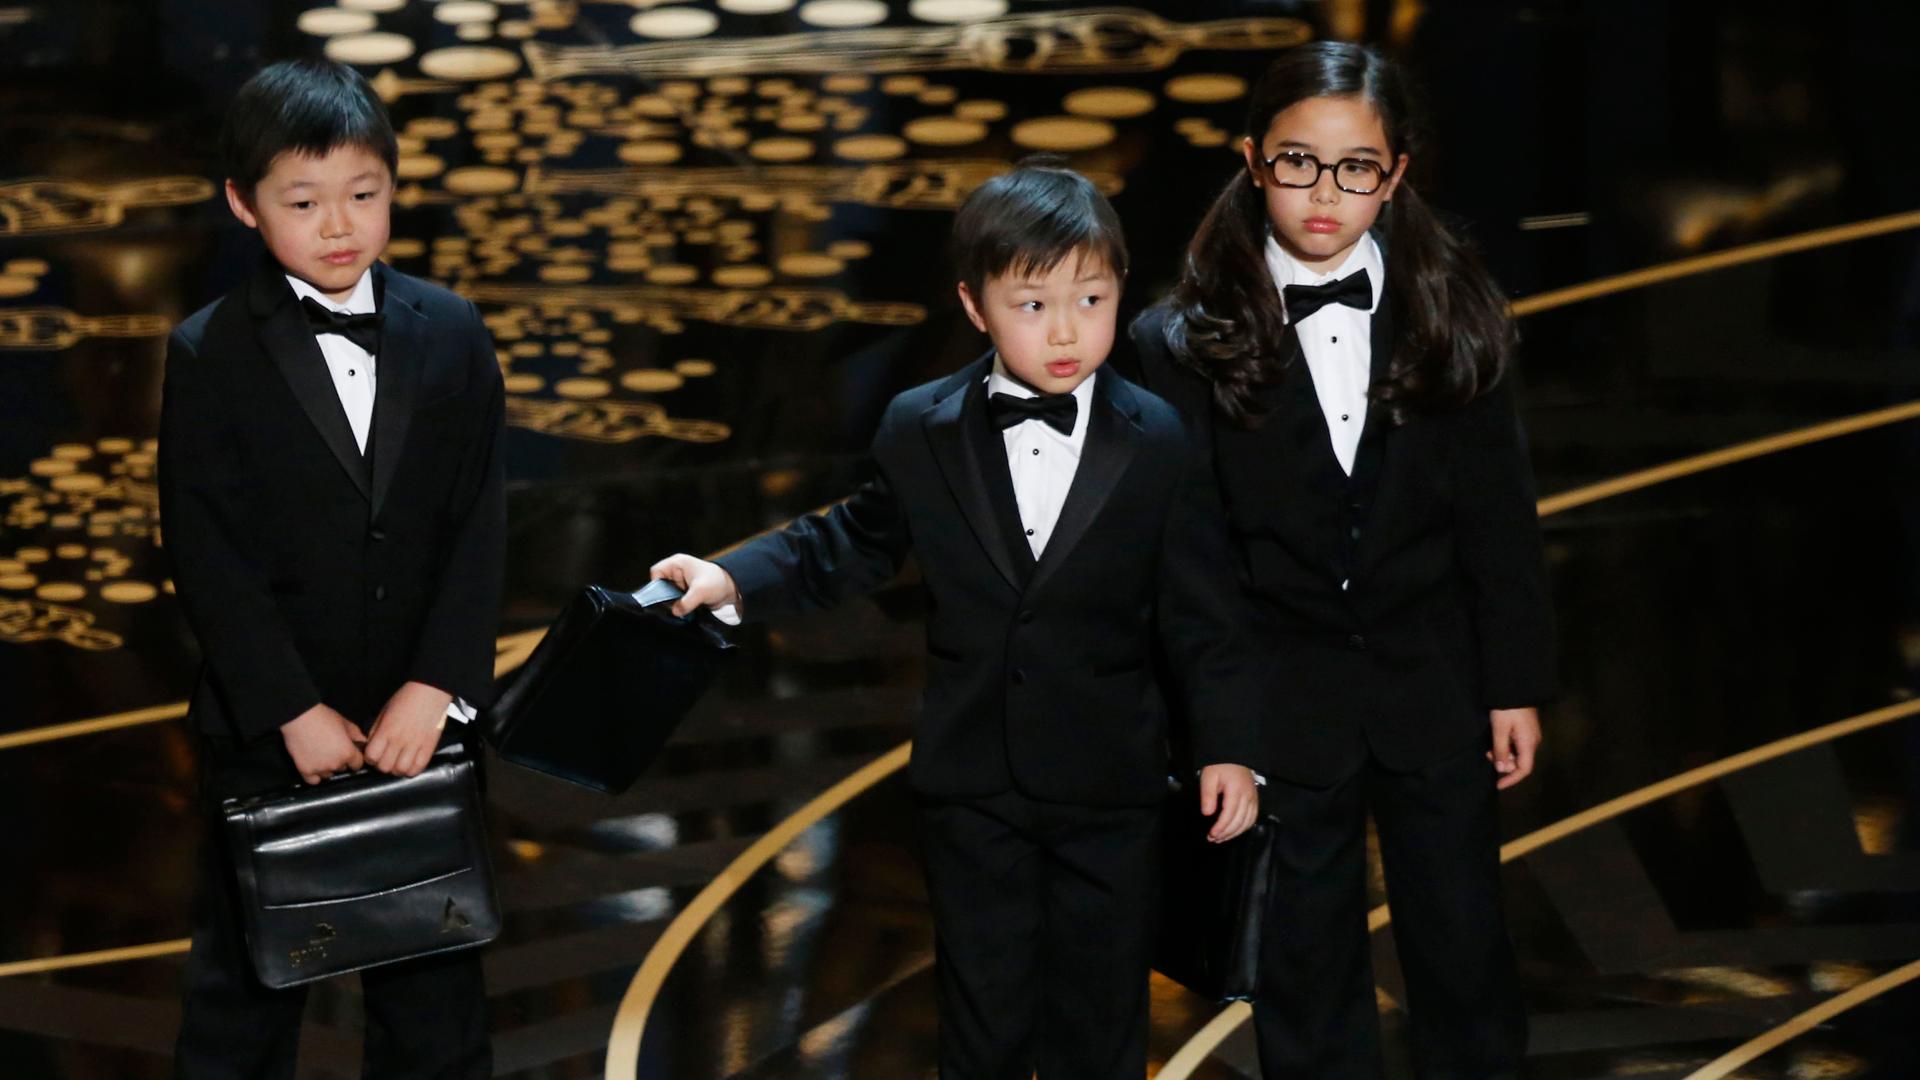 Three children in tuxedos on stage at the Oscars